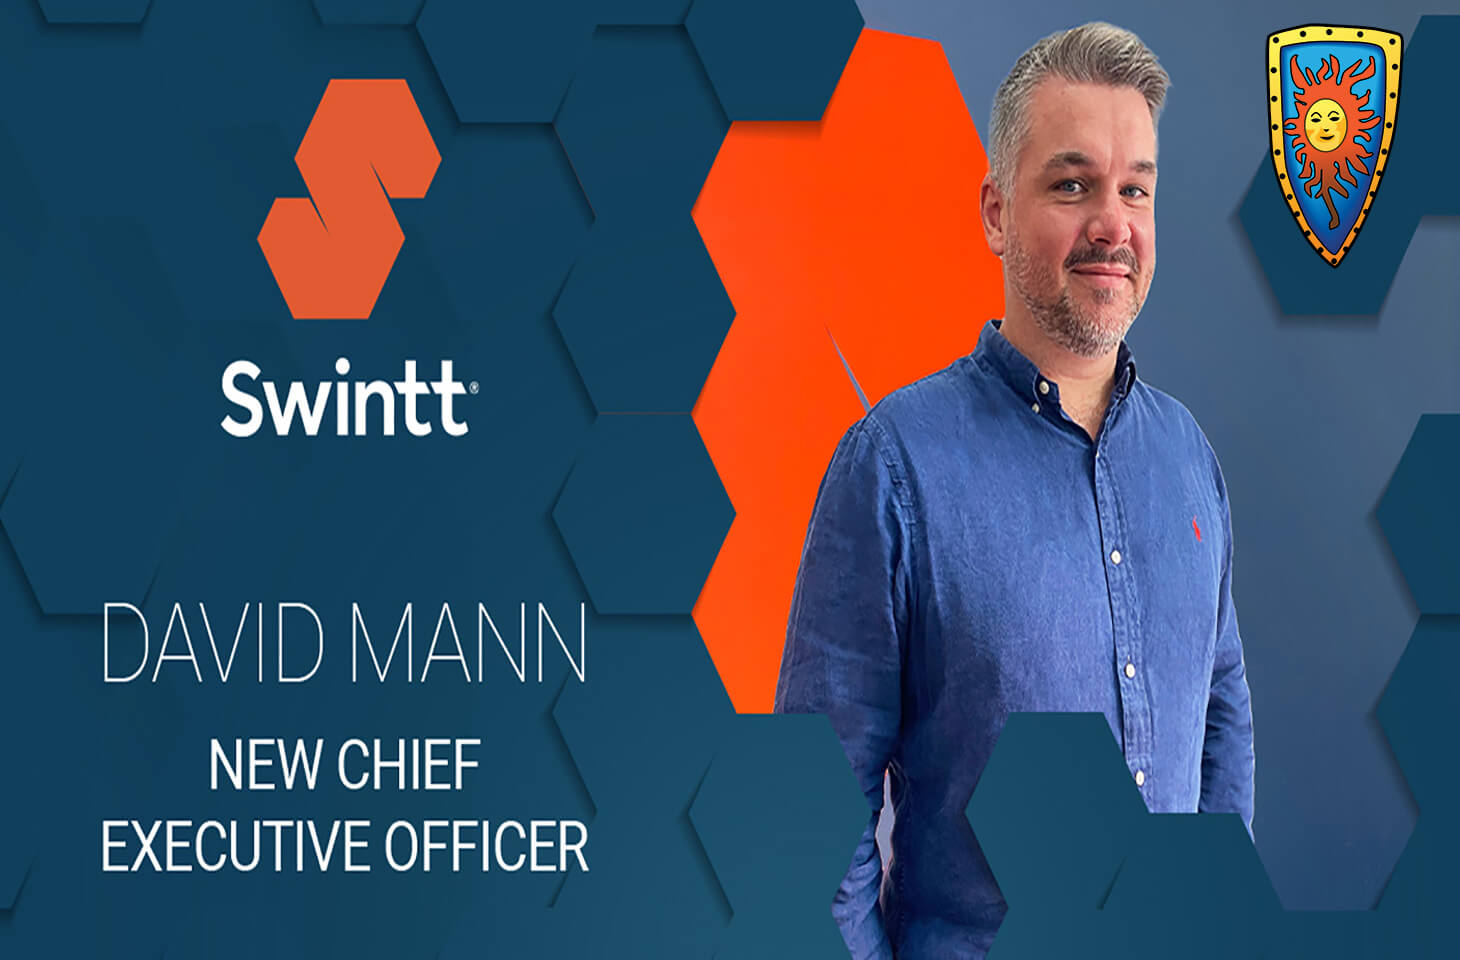 David Mann appointed as new CEO of Swintt